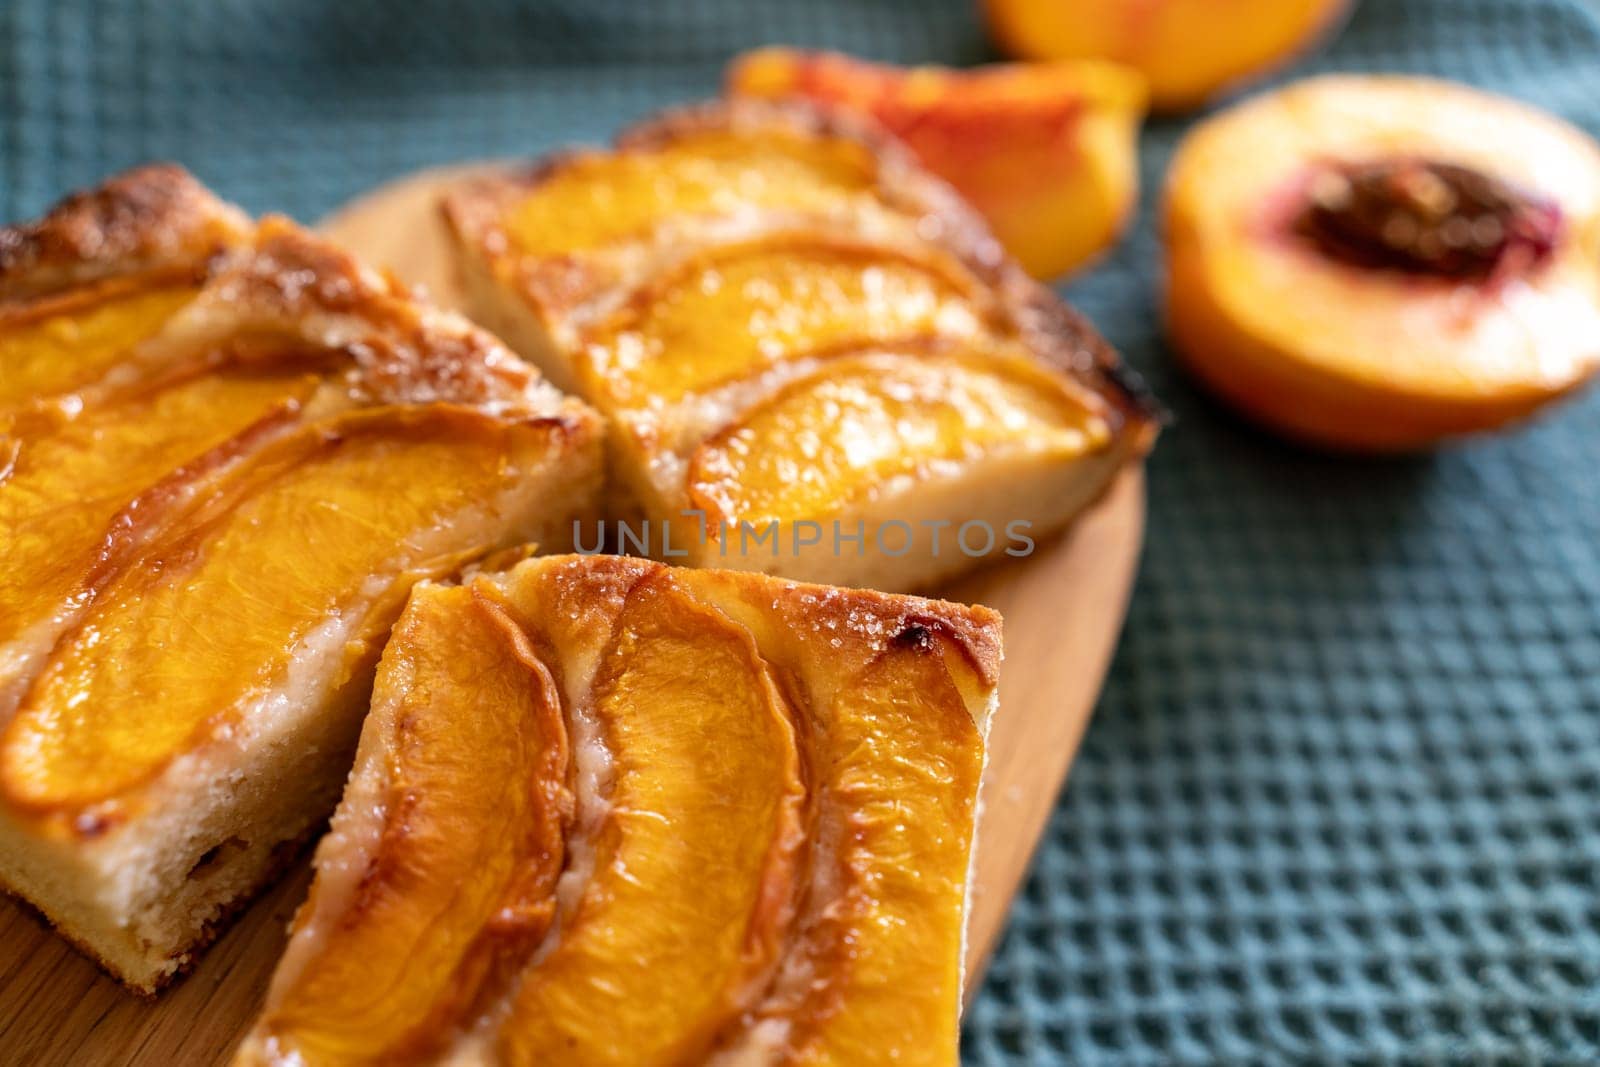 A dessert made of sliced peaches is on a wooden cutting board. The dessert is covered in sugar and looks delicious